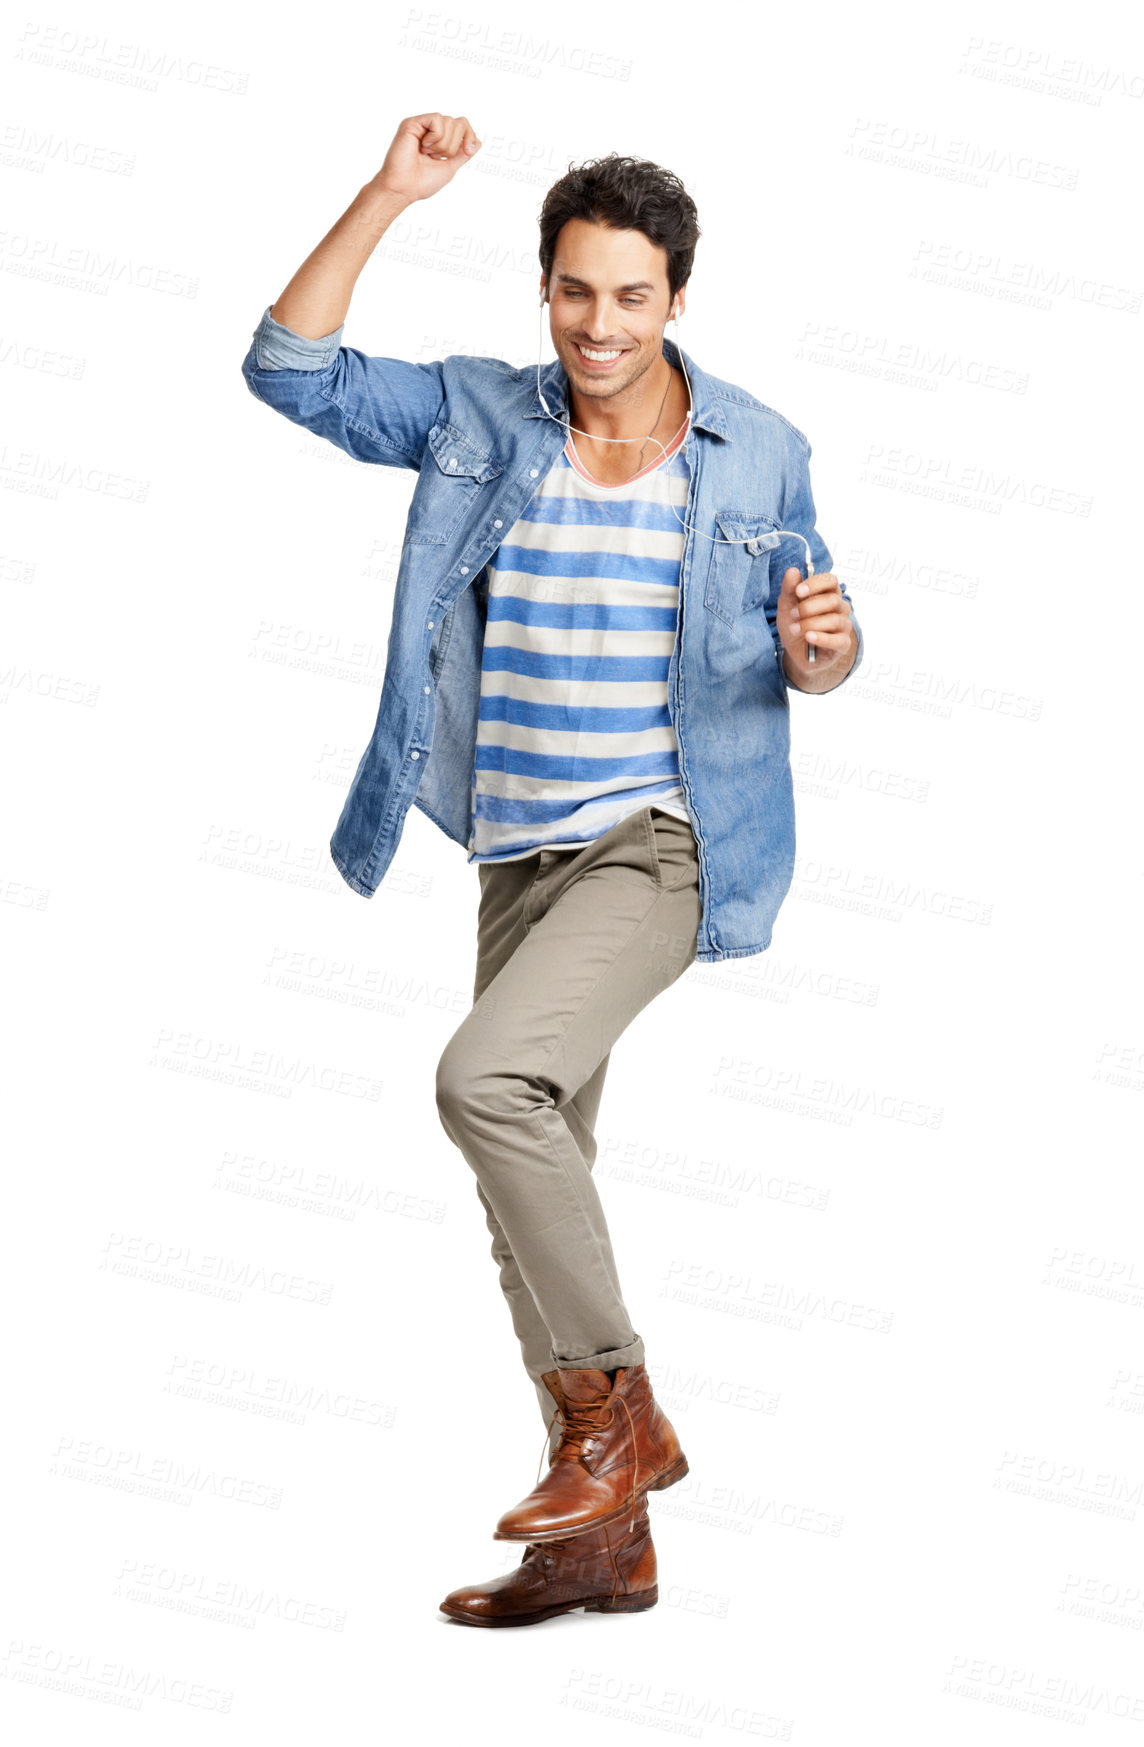 Buy stock photo A handsome young man punching the air in excitement